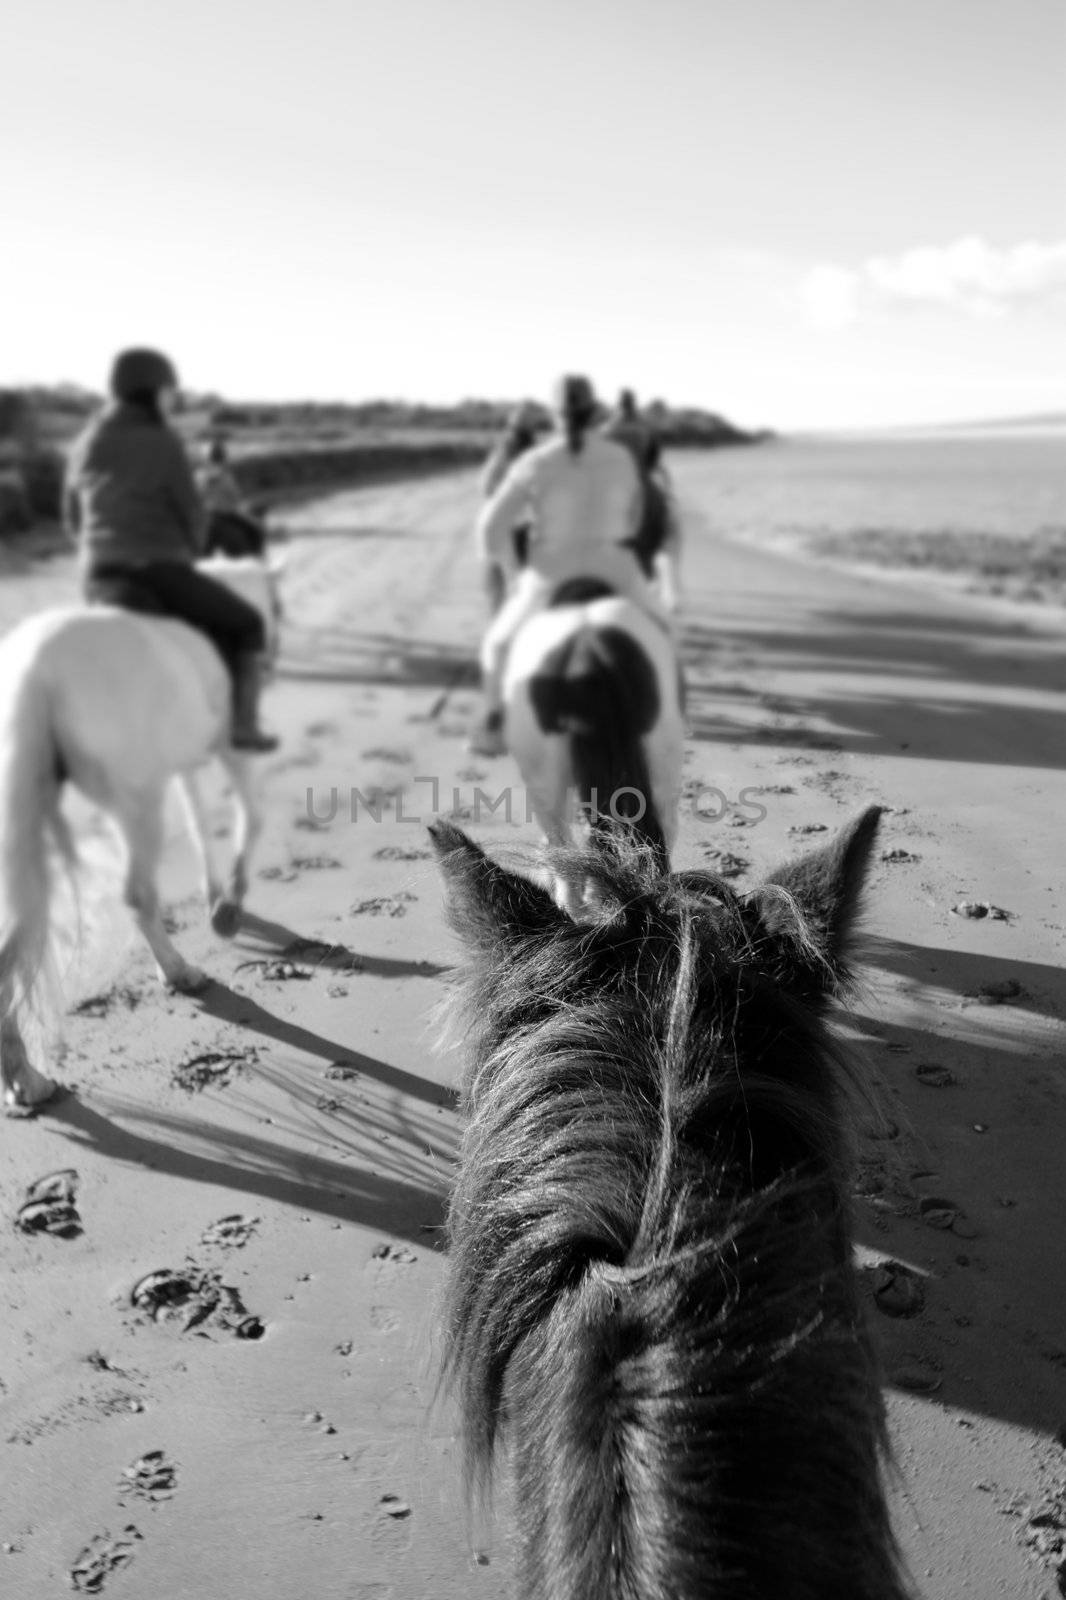 a riders view of a pony ride on a beautiful beach in county kerry ireland in black and white